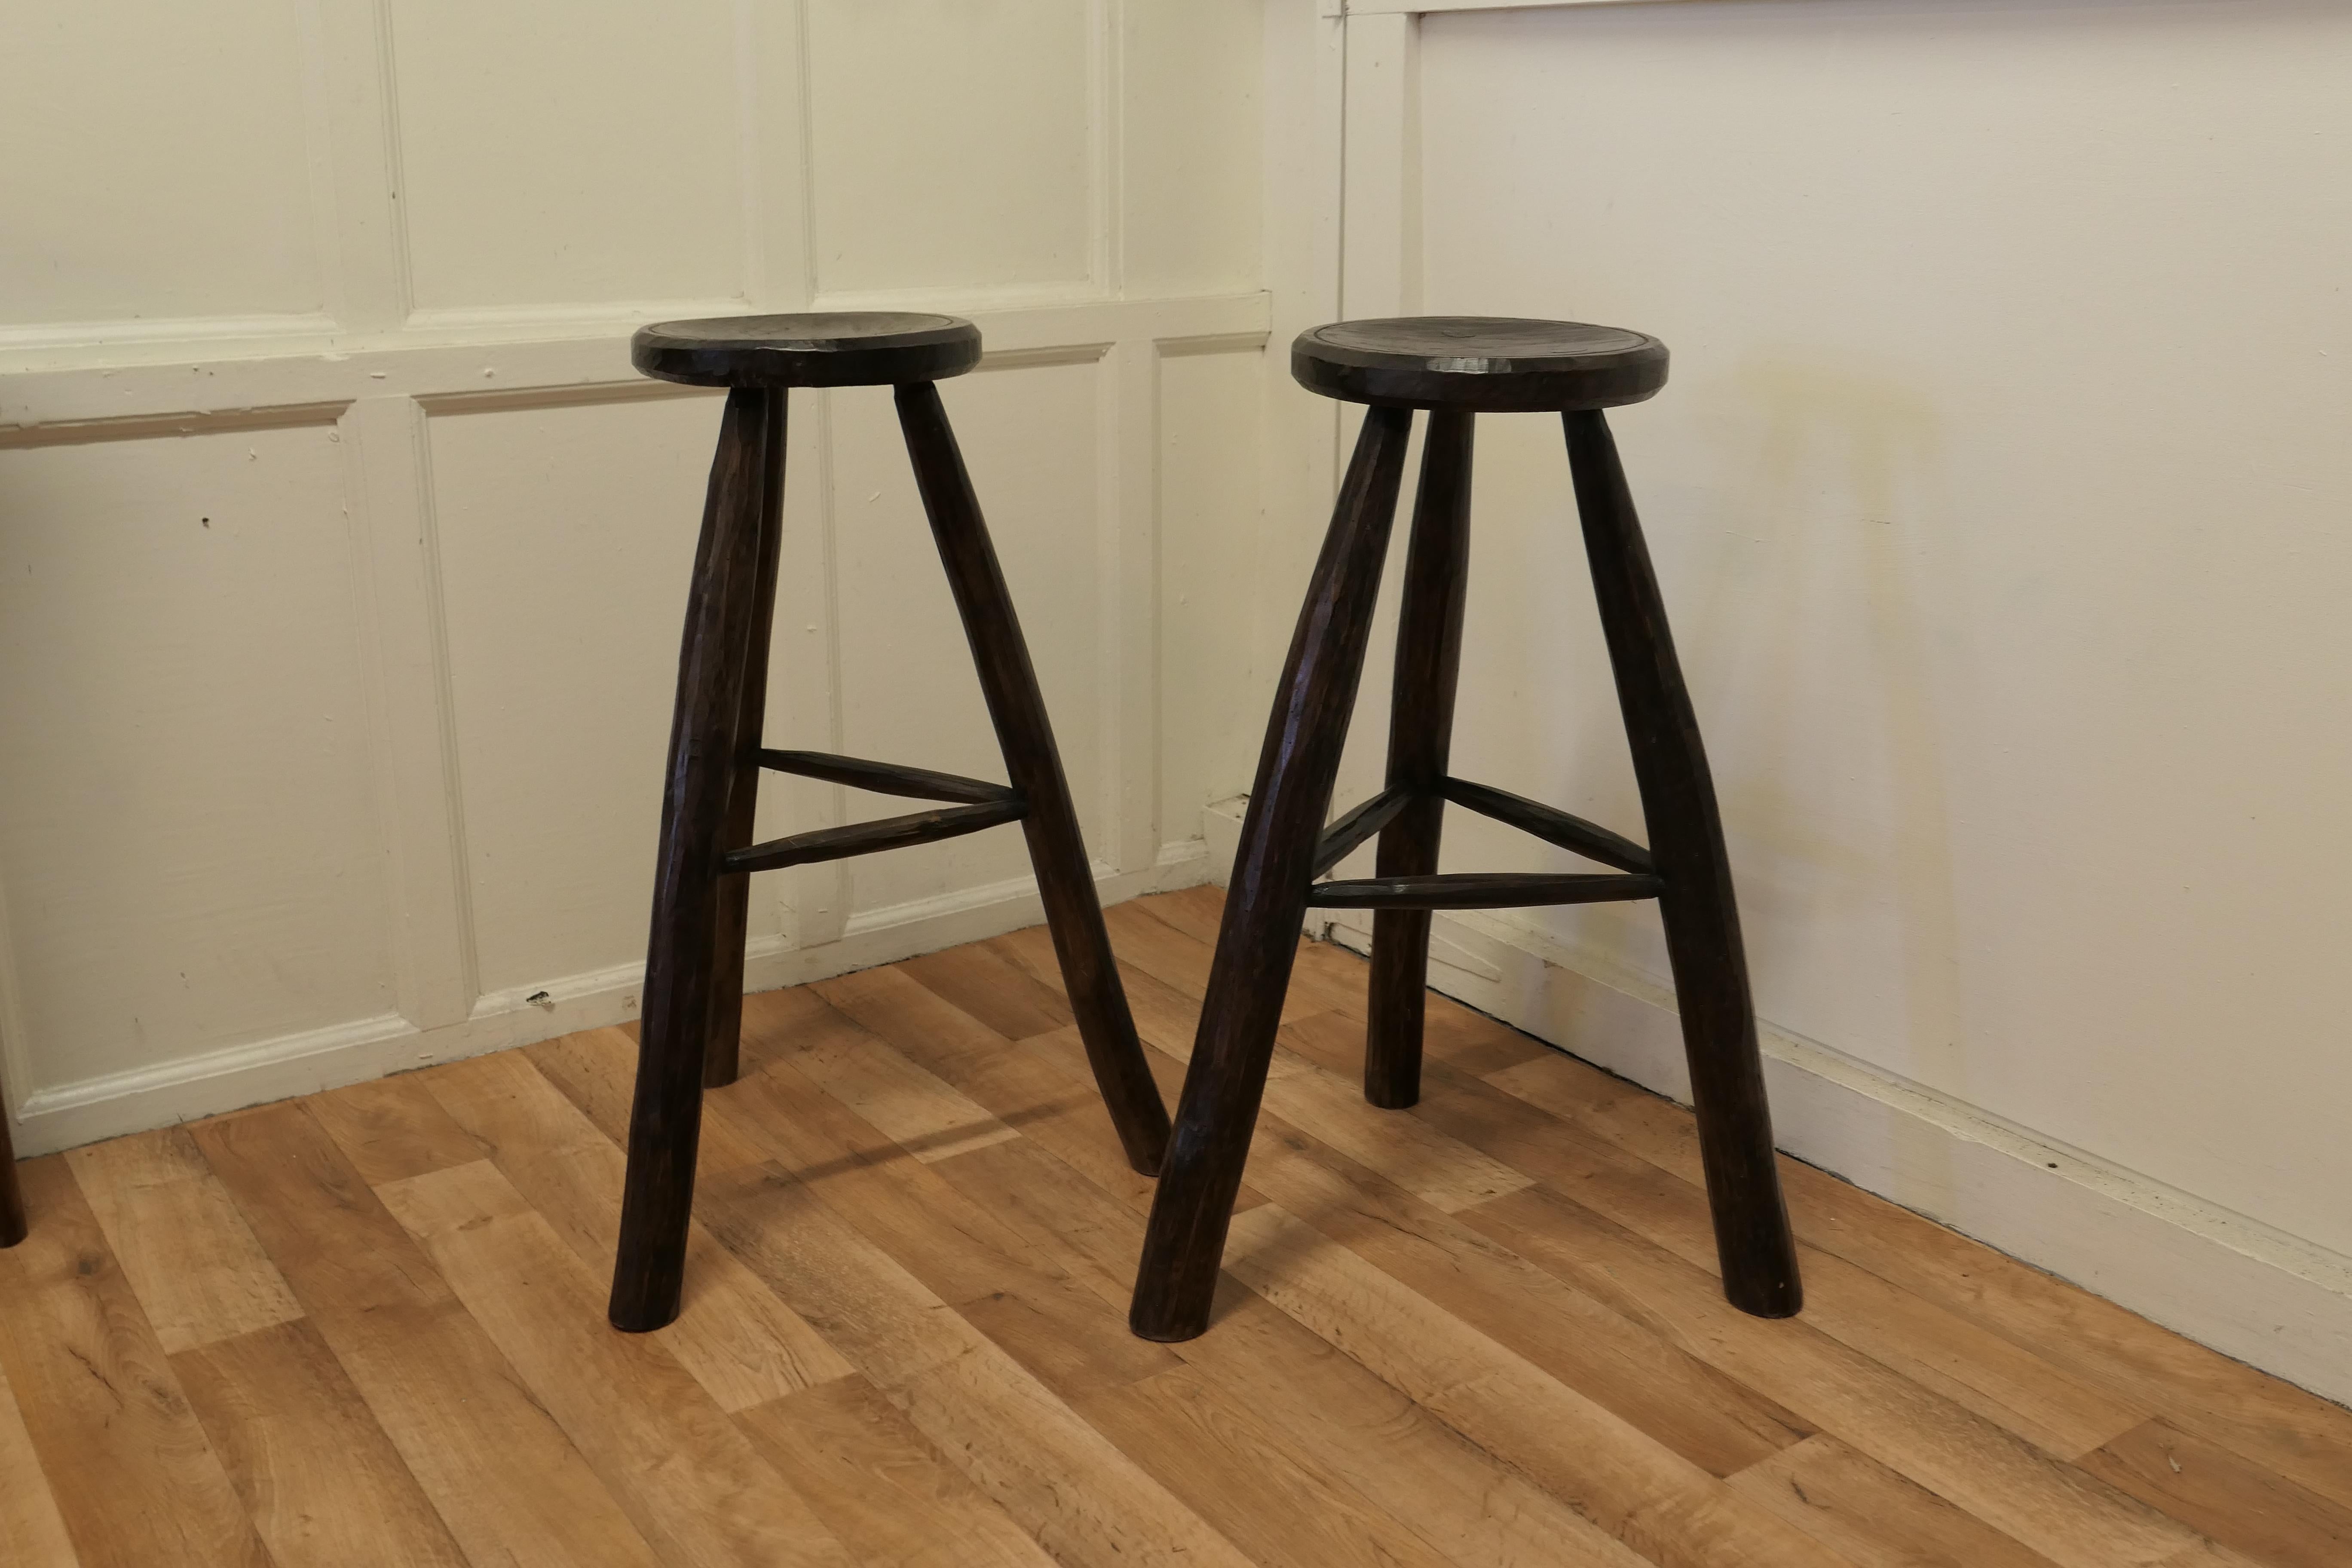 Pair of Very Rustic 19th Century French High Stools In Good Condition For Sale In Chillerton, Isle of Wight